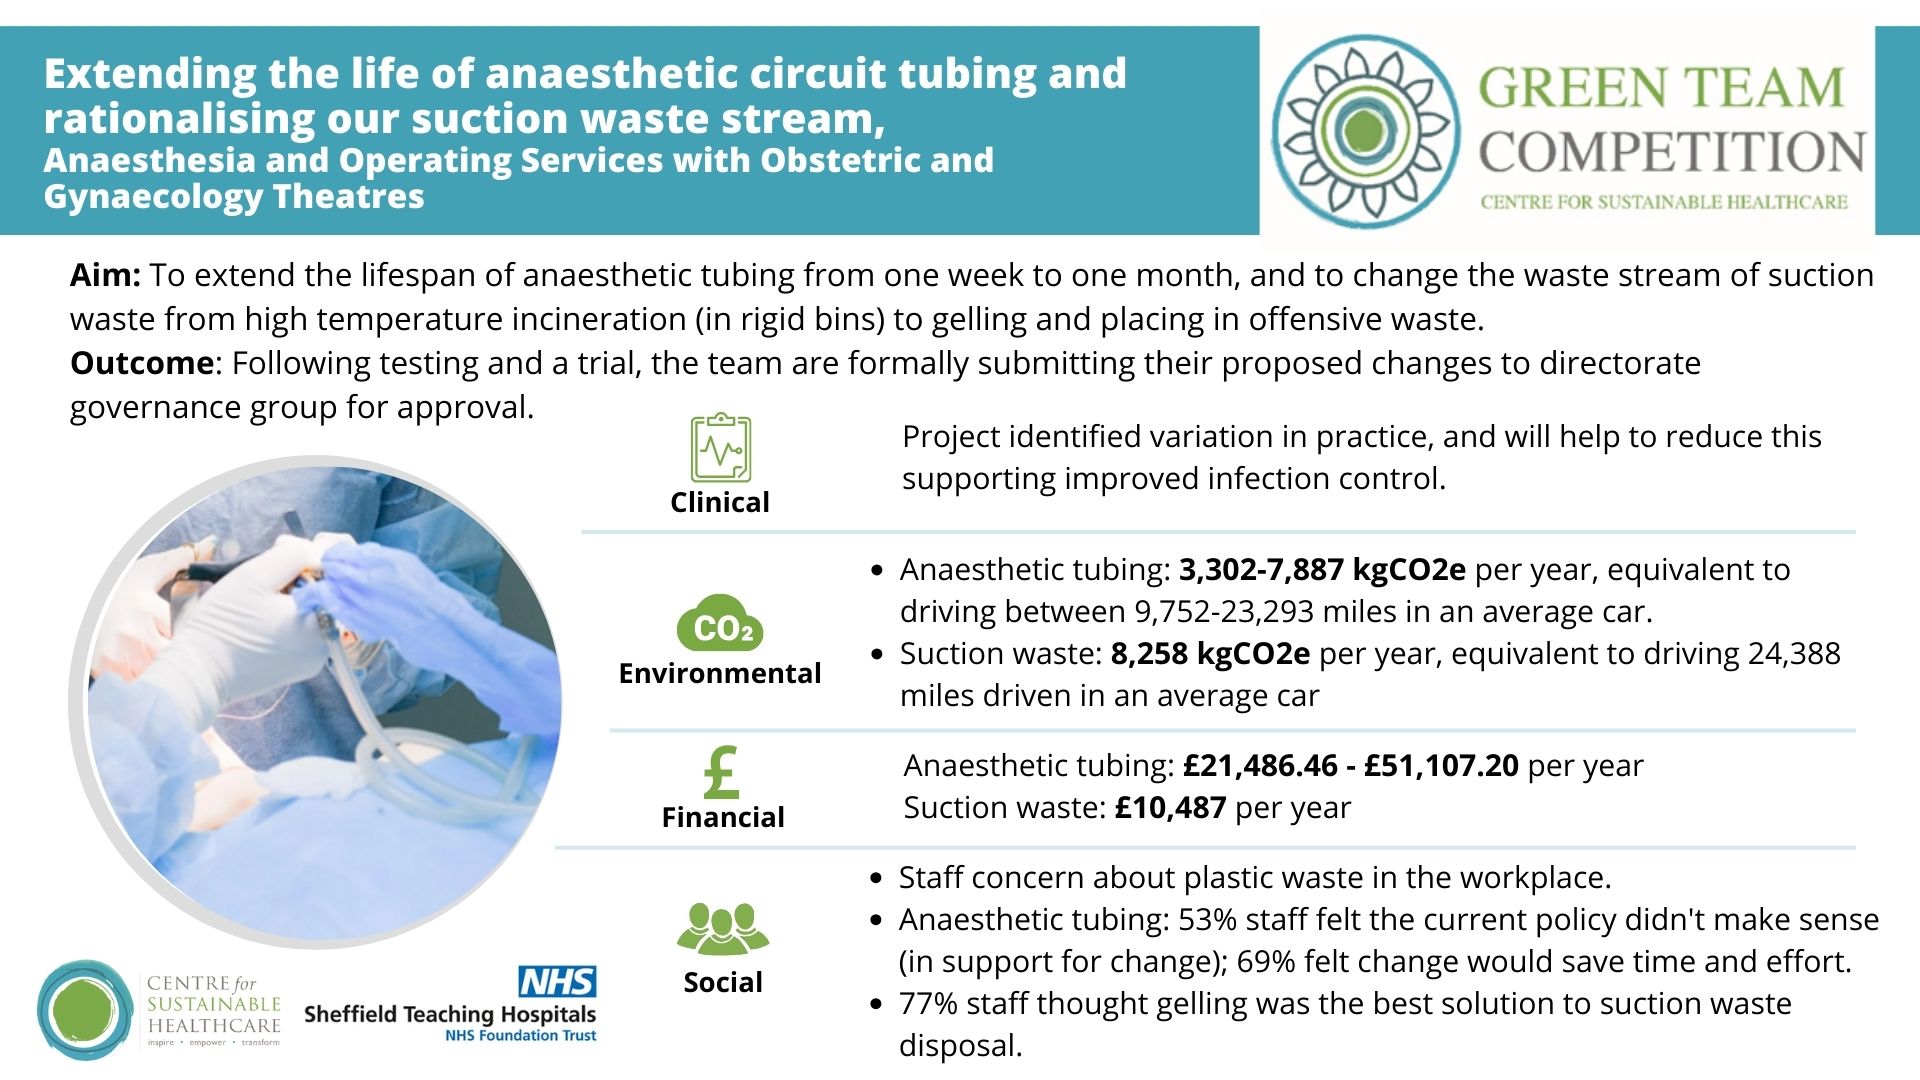 Sheffield Teaching Hospitals NHS Foundation Trust Green Team Competition 2023-24 Project 6: Extending the life of anaesthetic circuit tubing and rationalising our suction waste stream, Anaesthetics, Obstetric and Gynaecology Theatres